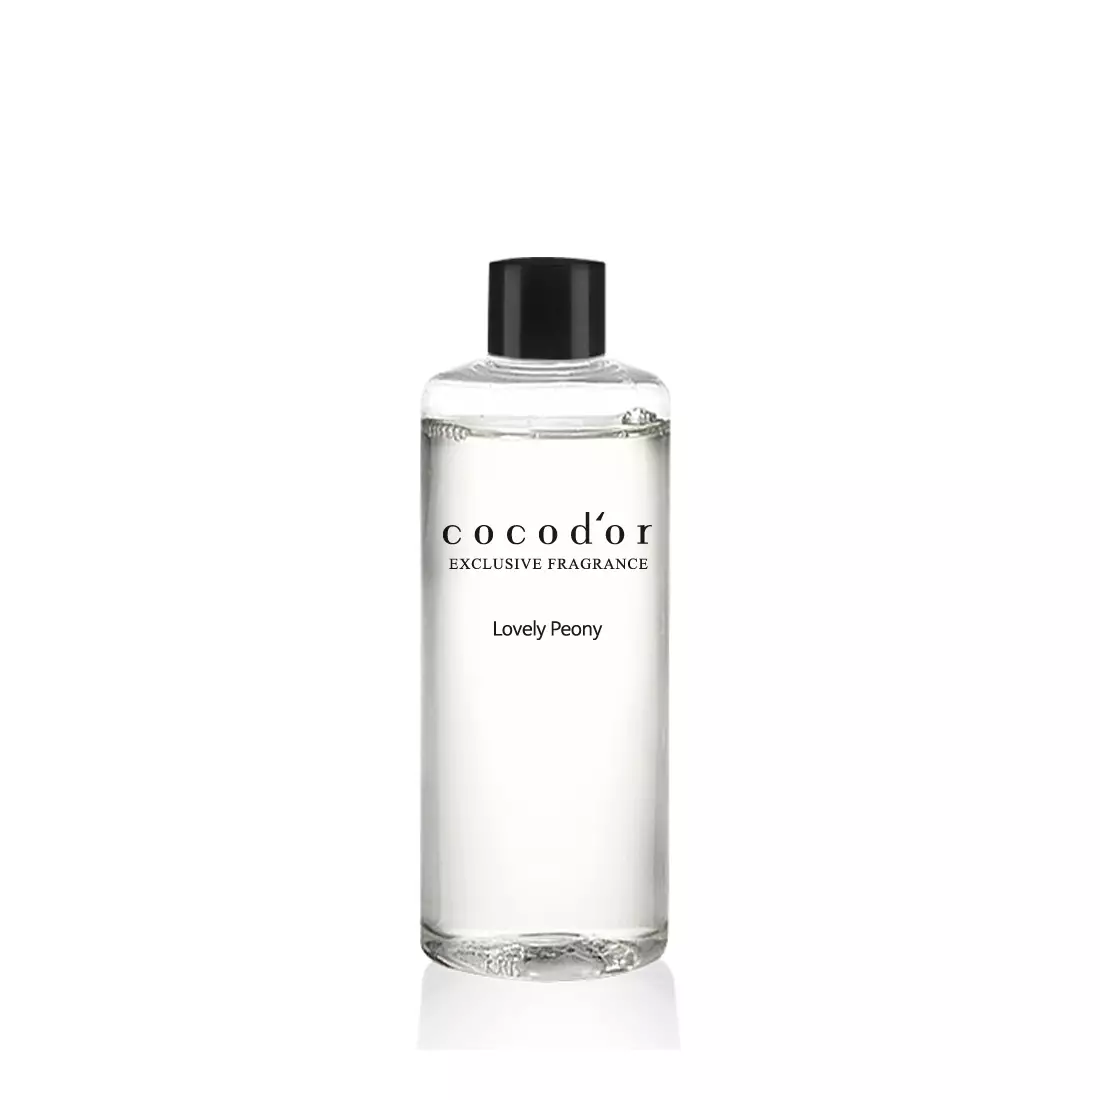 COCODOR spare diffuser oil, lovely peony 200 ml